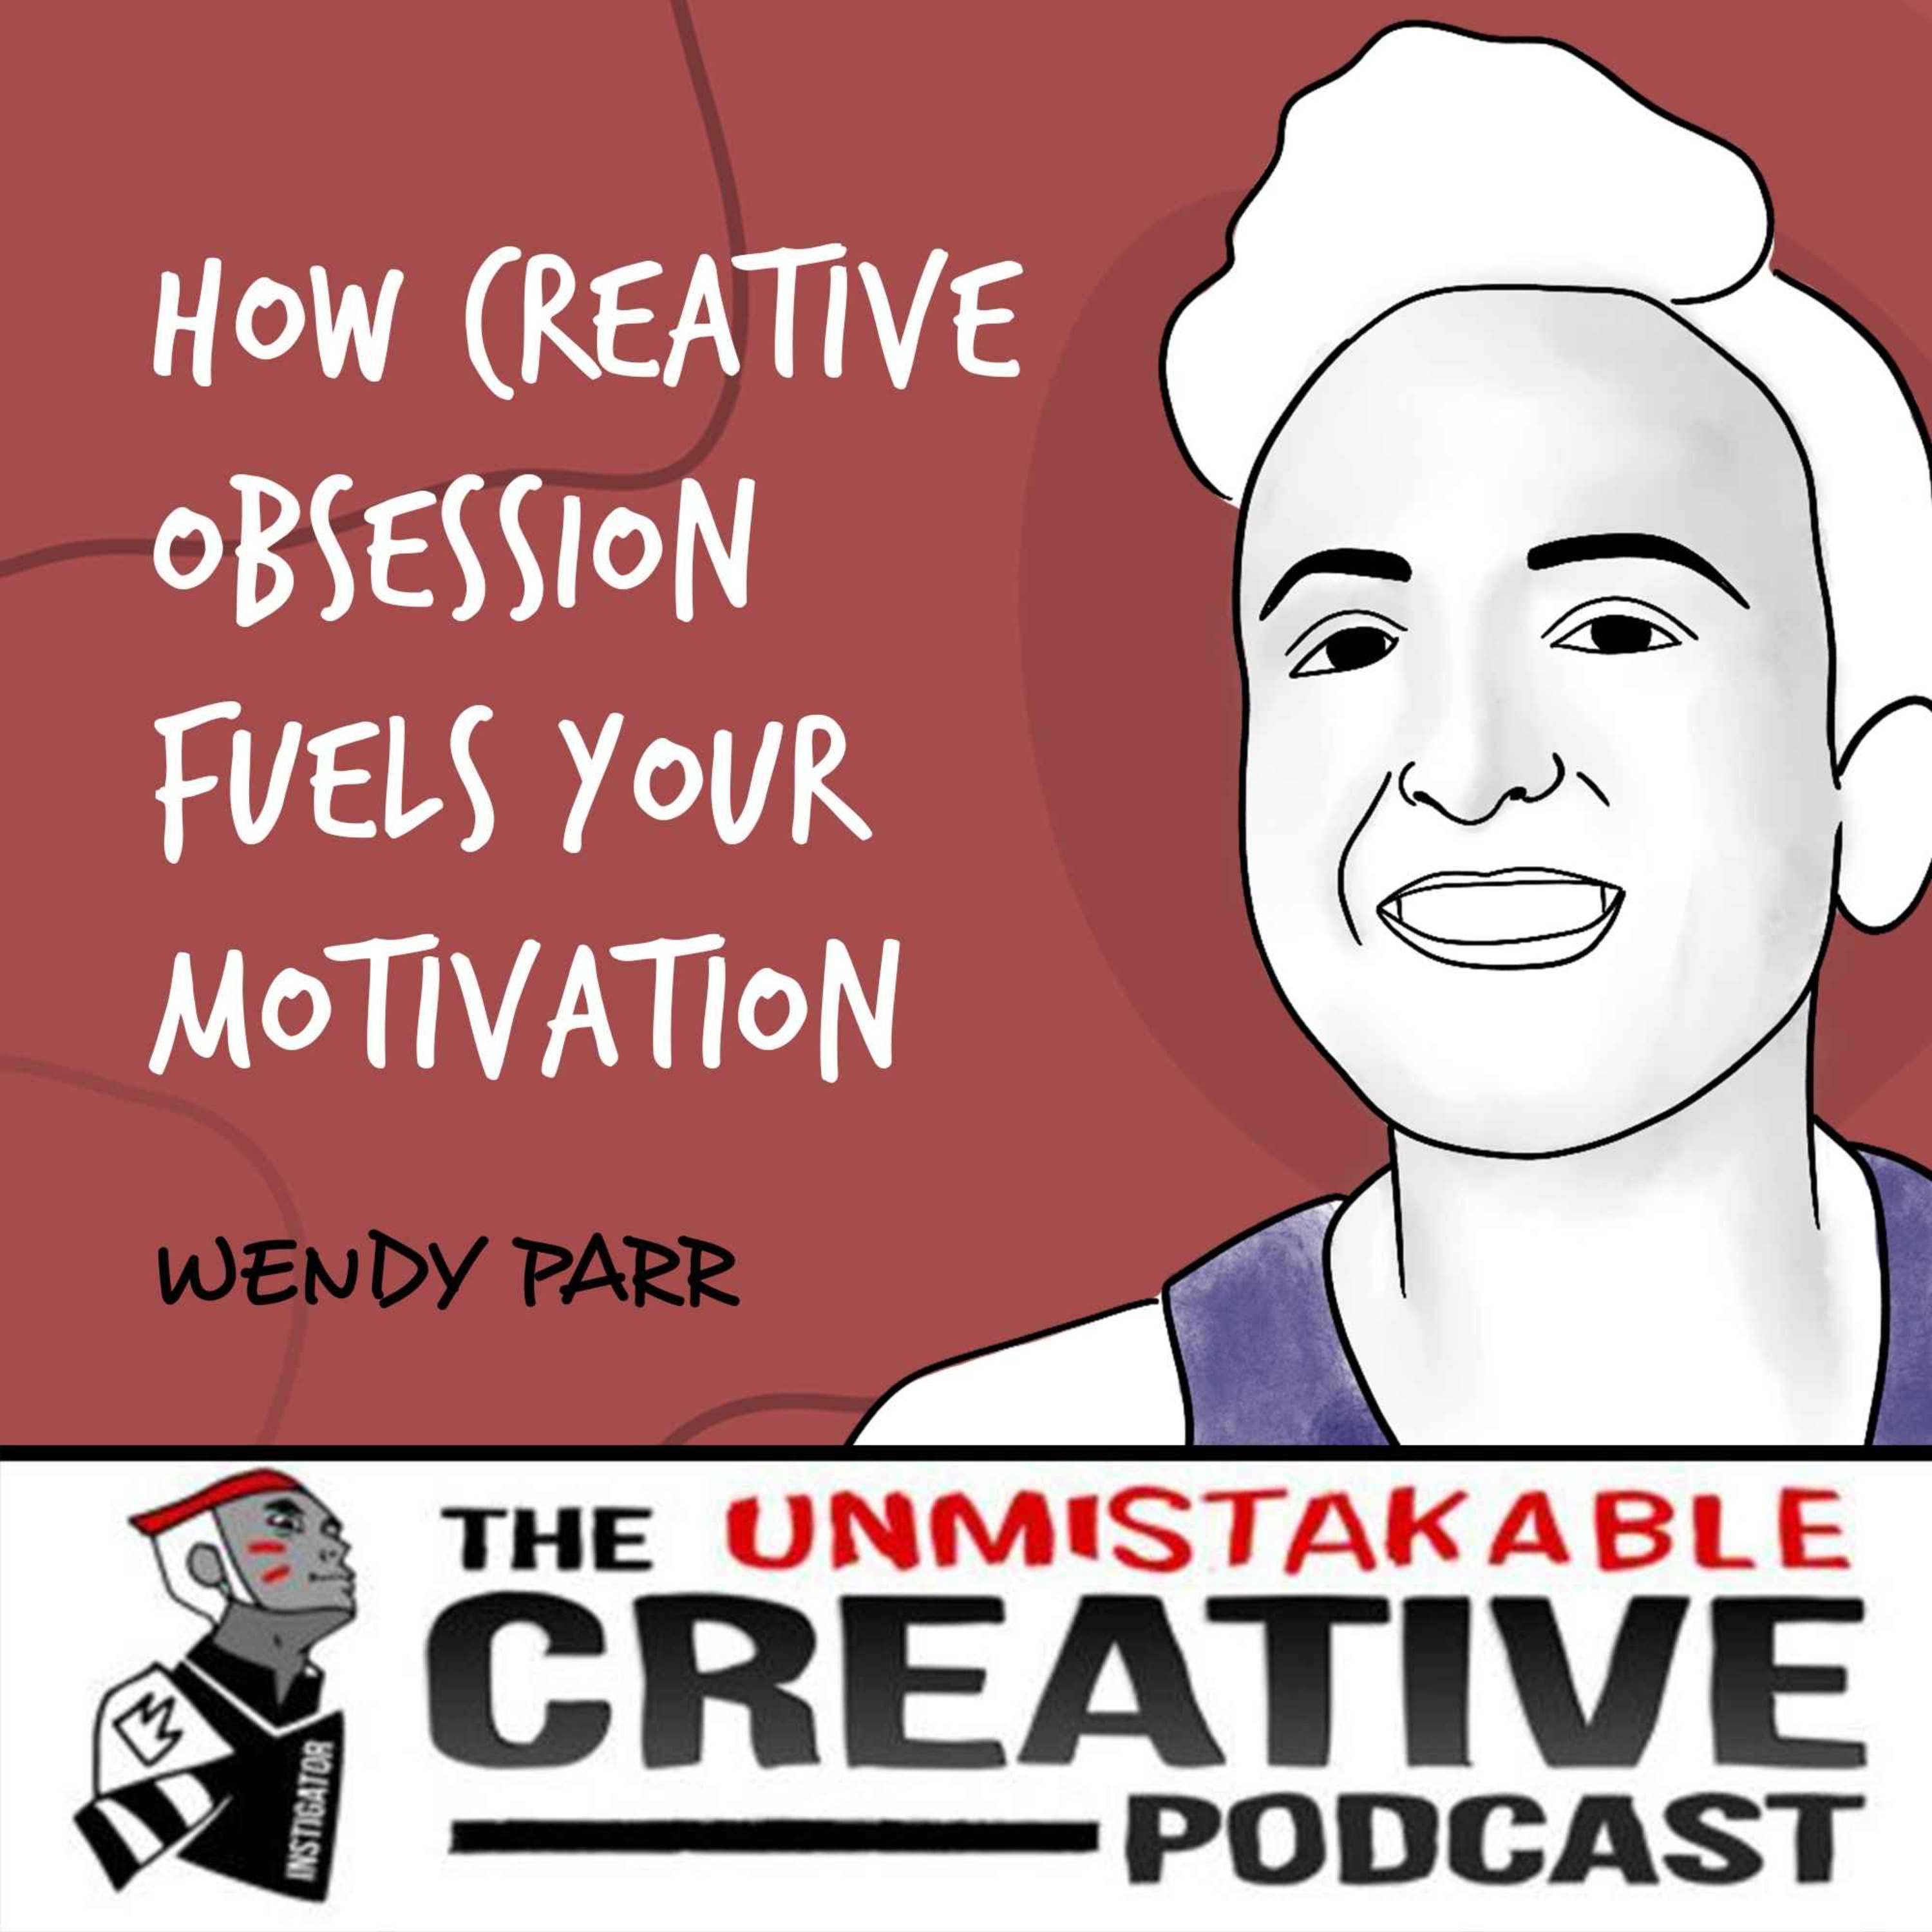 Wendy Parr | How Creative Obsession Fuels Your Motivation Image